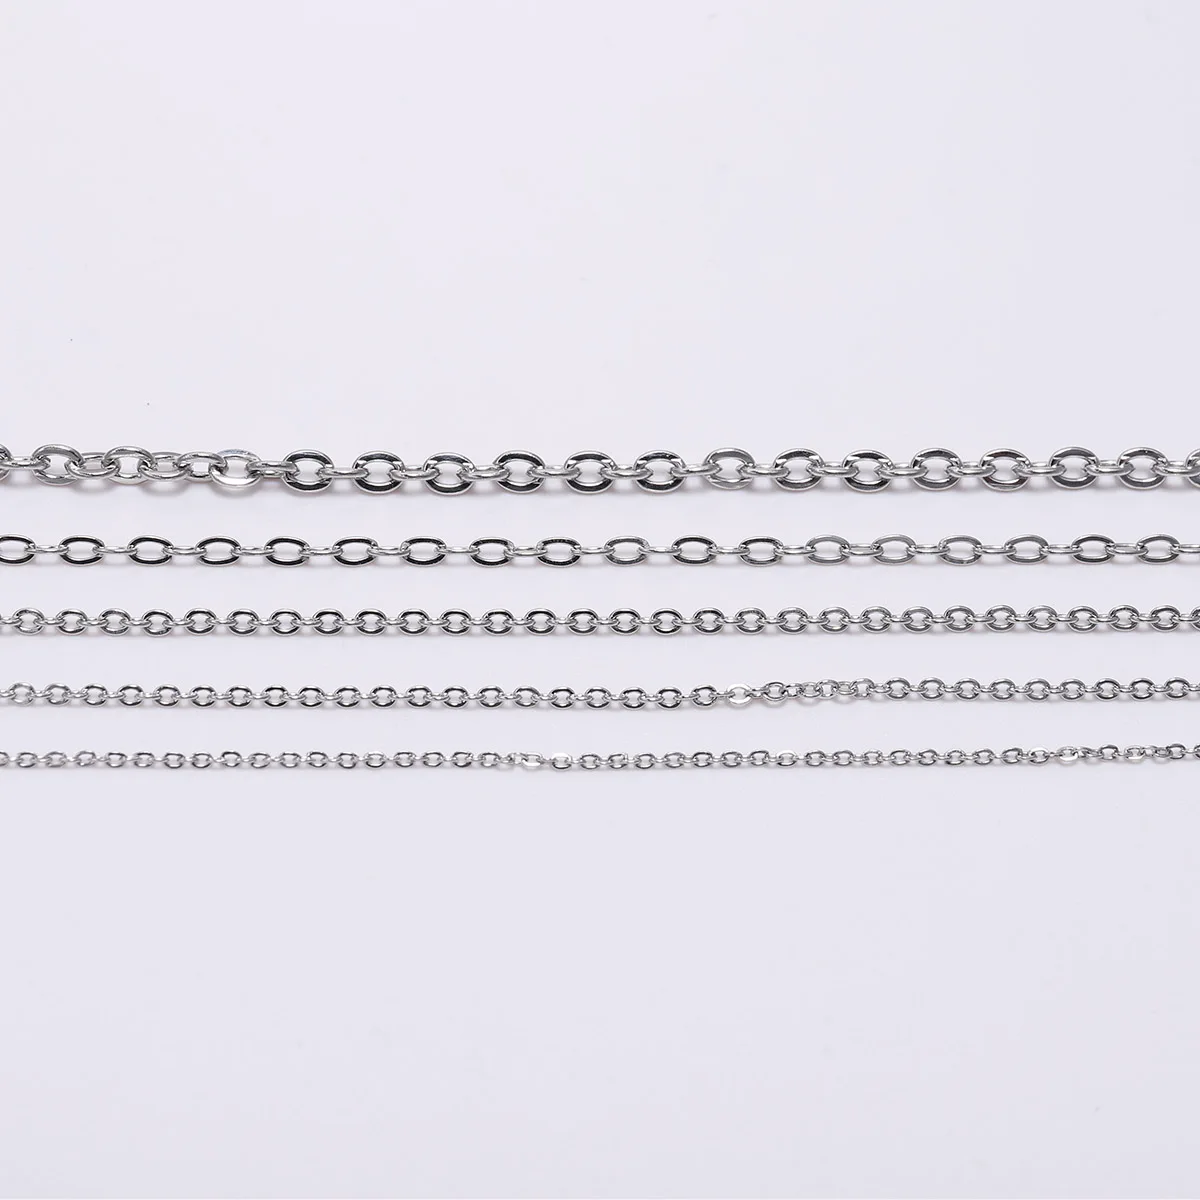 

5M/Lot 1.2 1.5 2.0 2.4 3.0mm Stainless steel Bulk Fine Necklace Chain DIY Jewelry Making Supplies Chains Findings Accessories